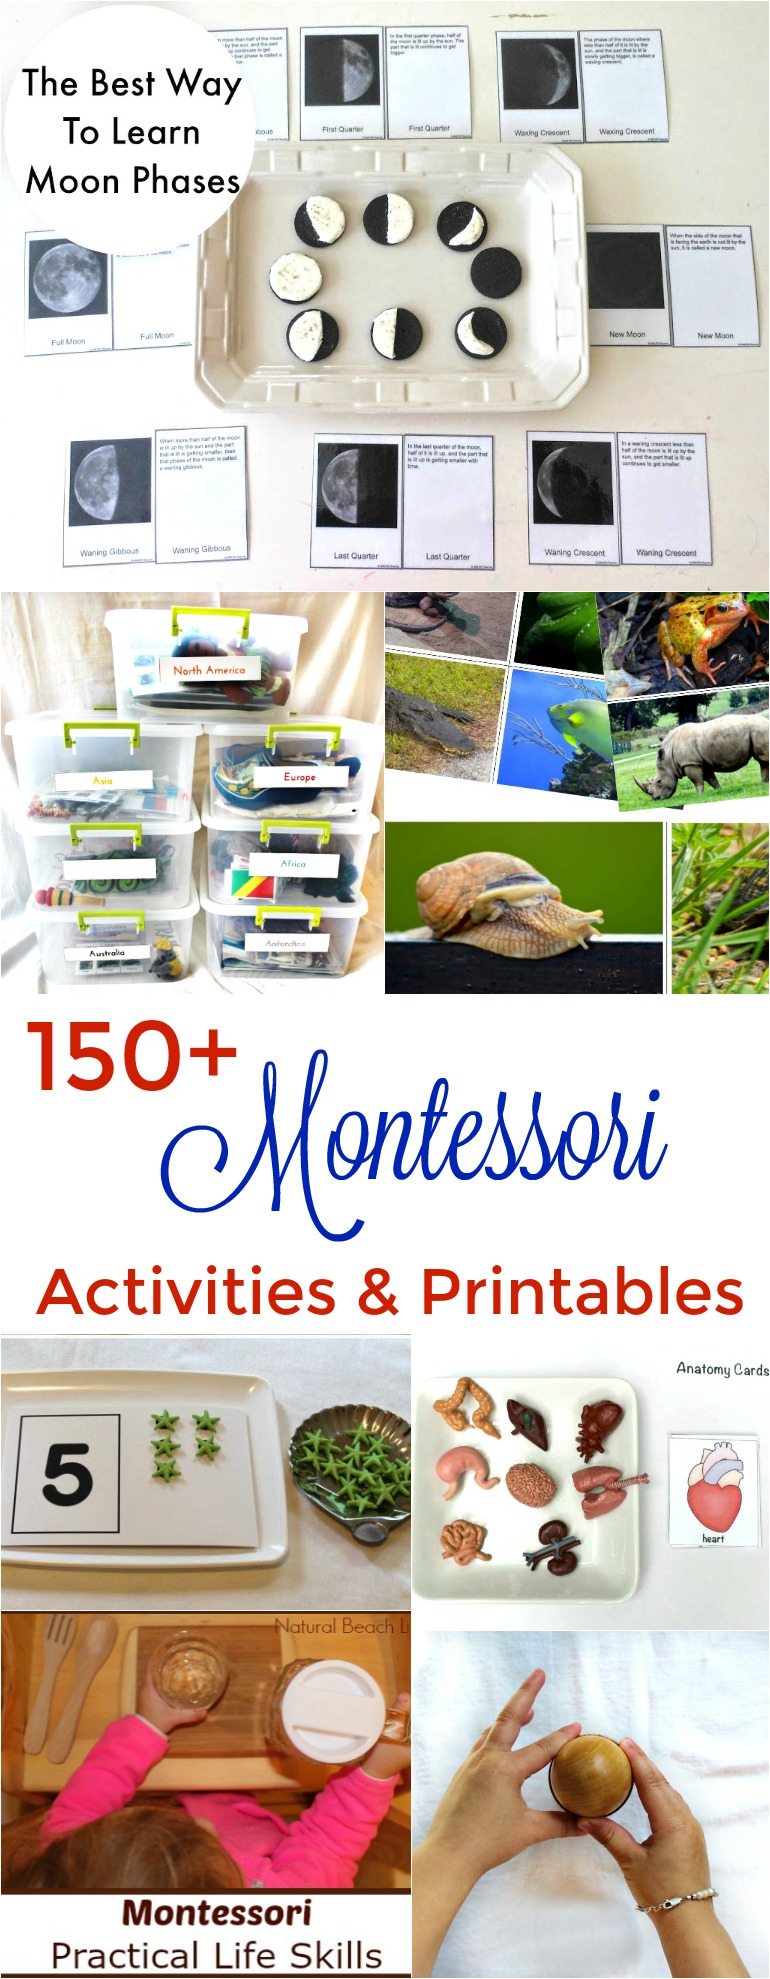 150+ The Best Montessori Activities and Hundreds of Montessori activities for Preschool and Kindergarten. You'll find Free Montessori Printables, Montessori Books, Montessori Toys, Montessori Practical Life, Montessori Math, Montessori Science and Montessori Sensory Activities. Everything for Montessori Baby through elementary age children. #Montessori #montessoriactivities